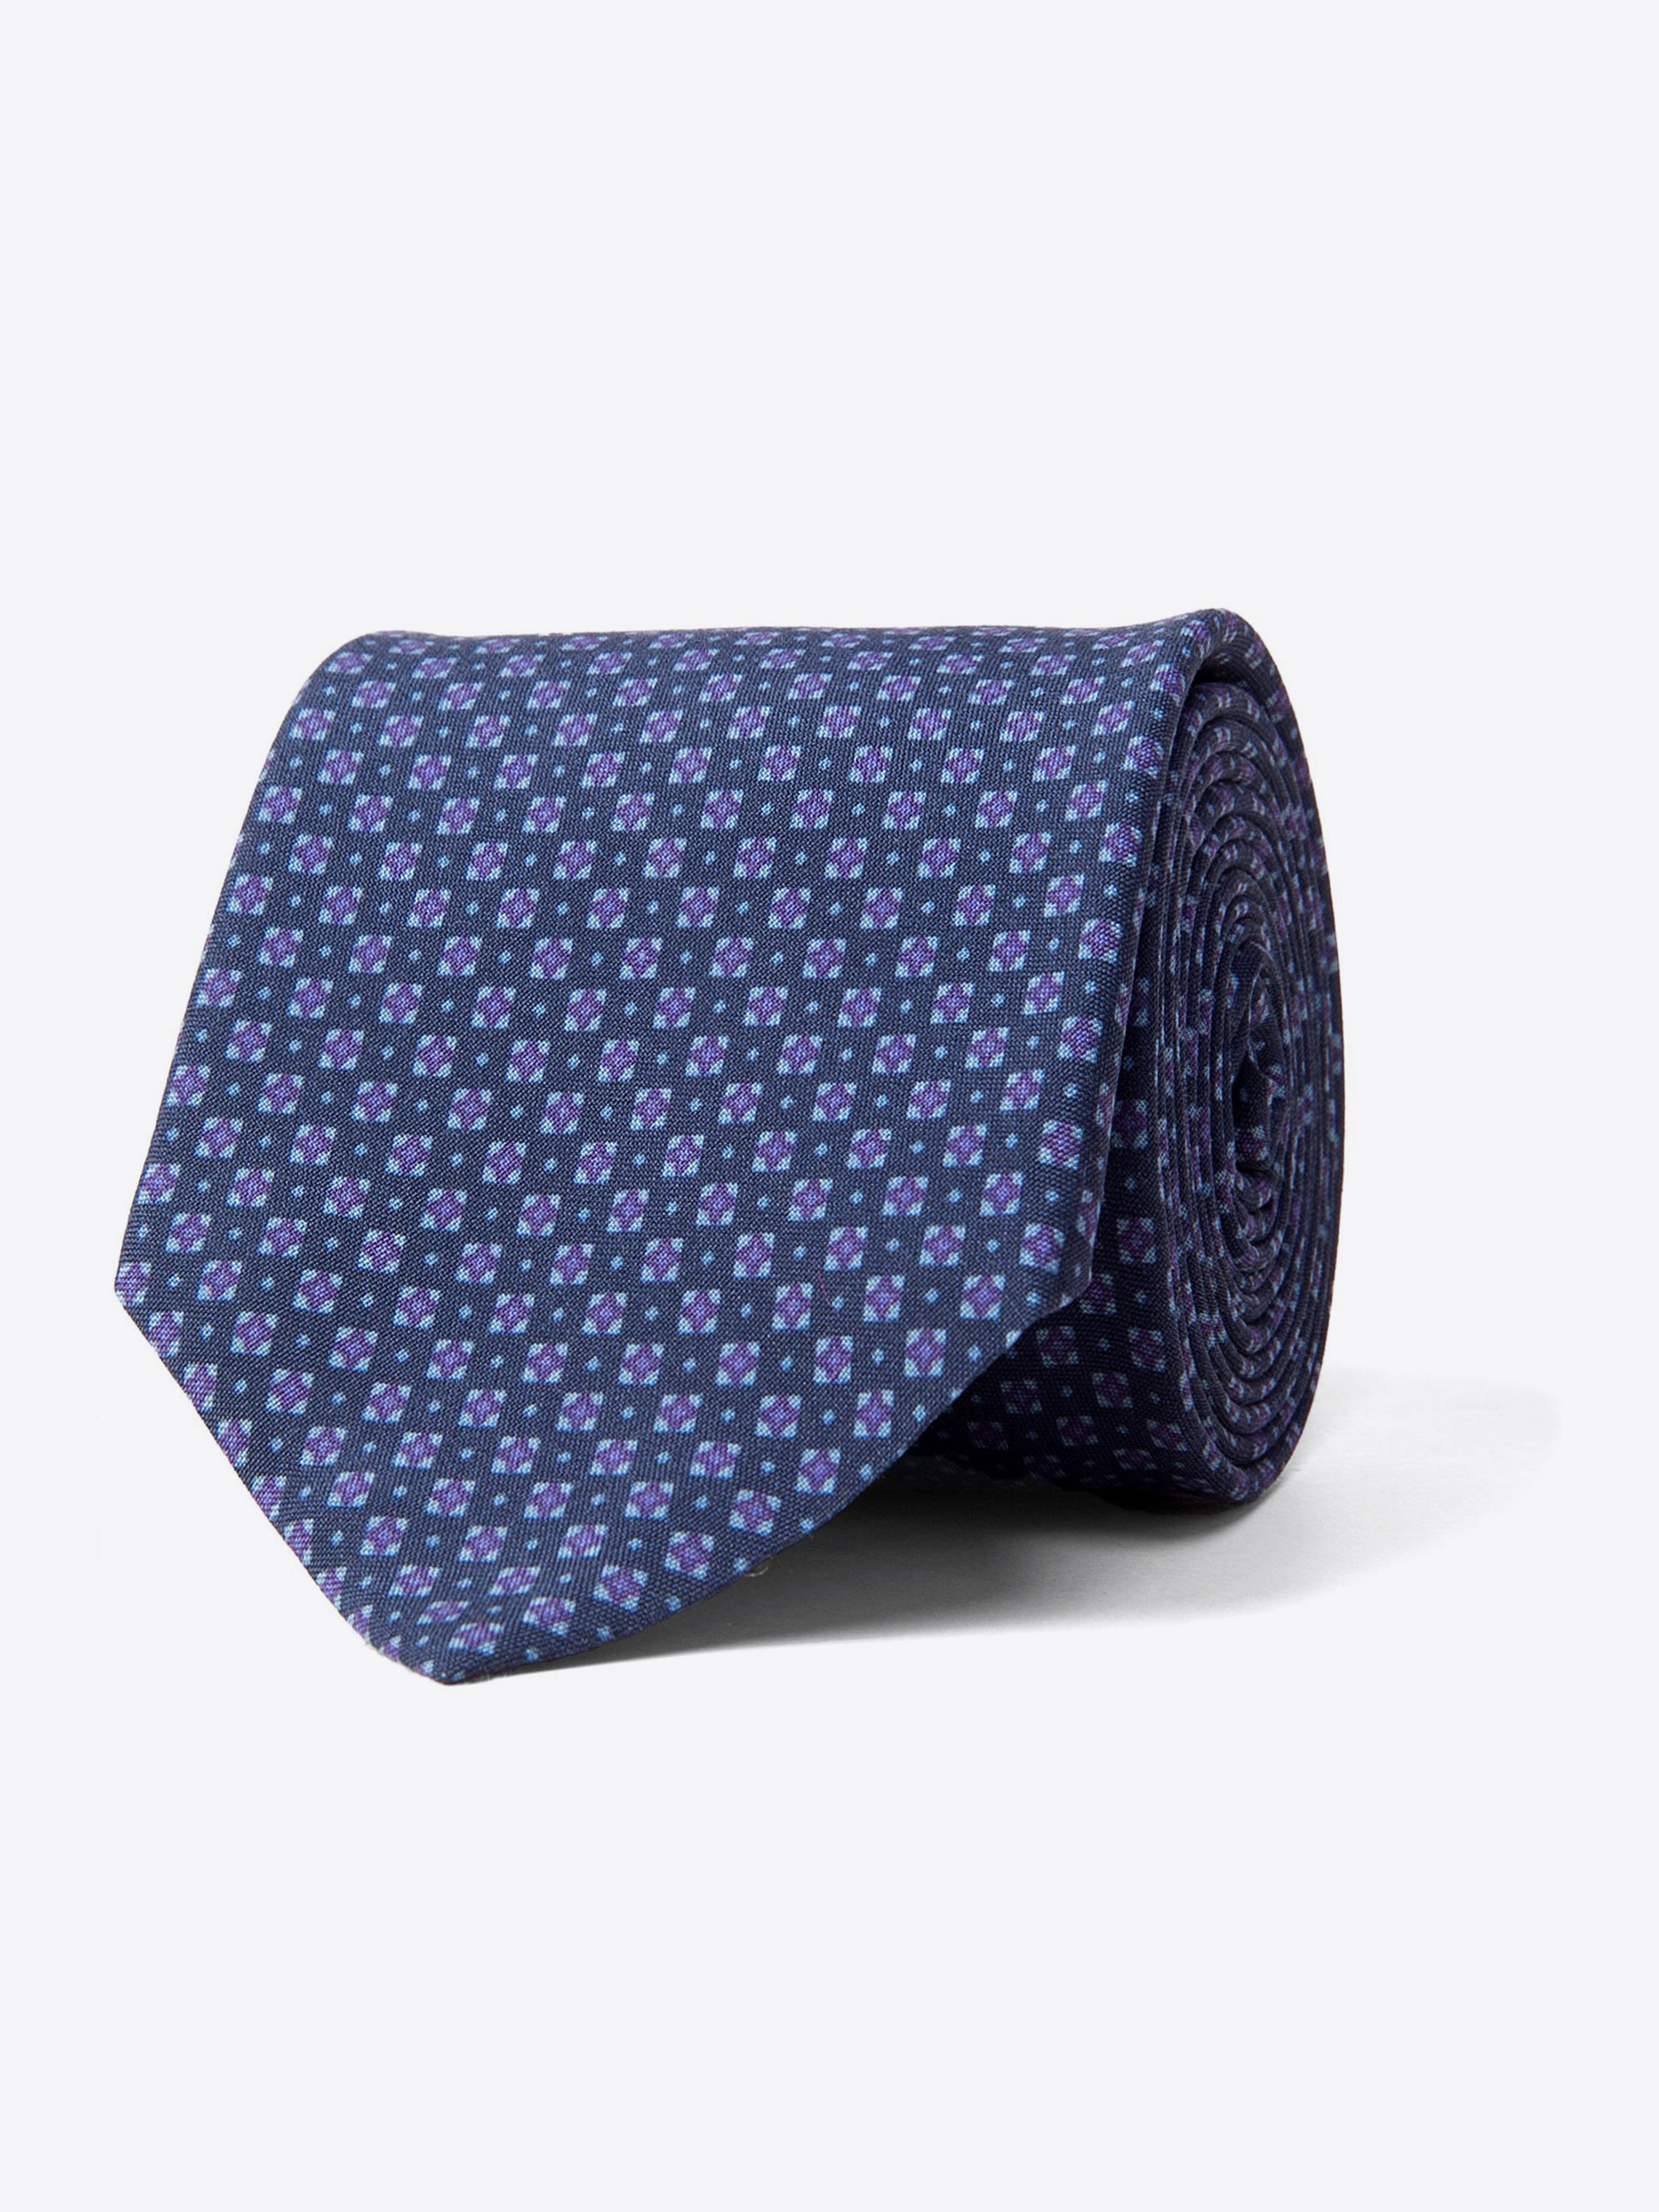 Zoom Image of Blue and Lavender Small Foulard Print Tie